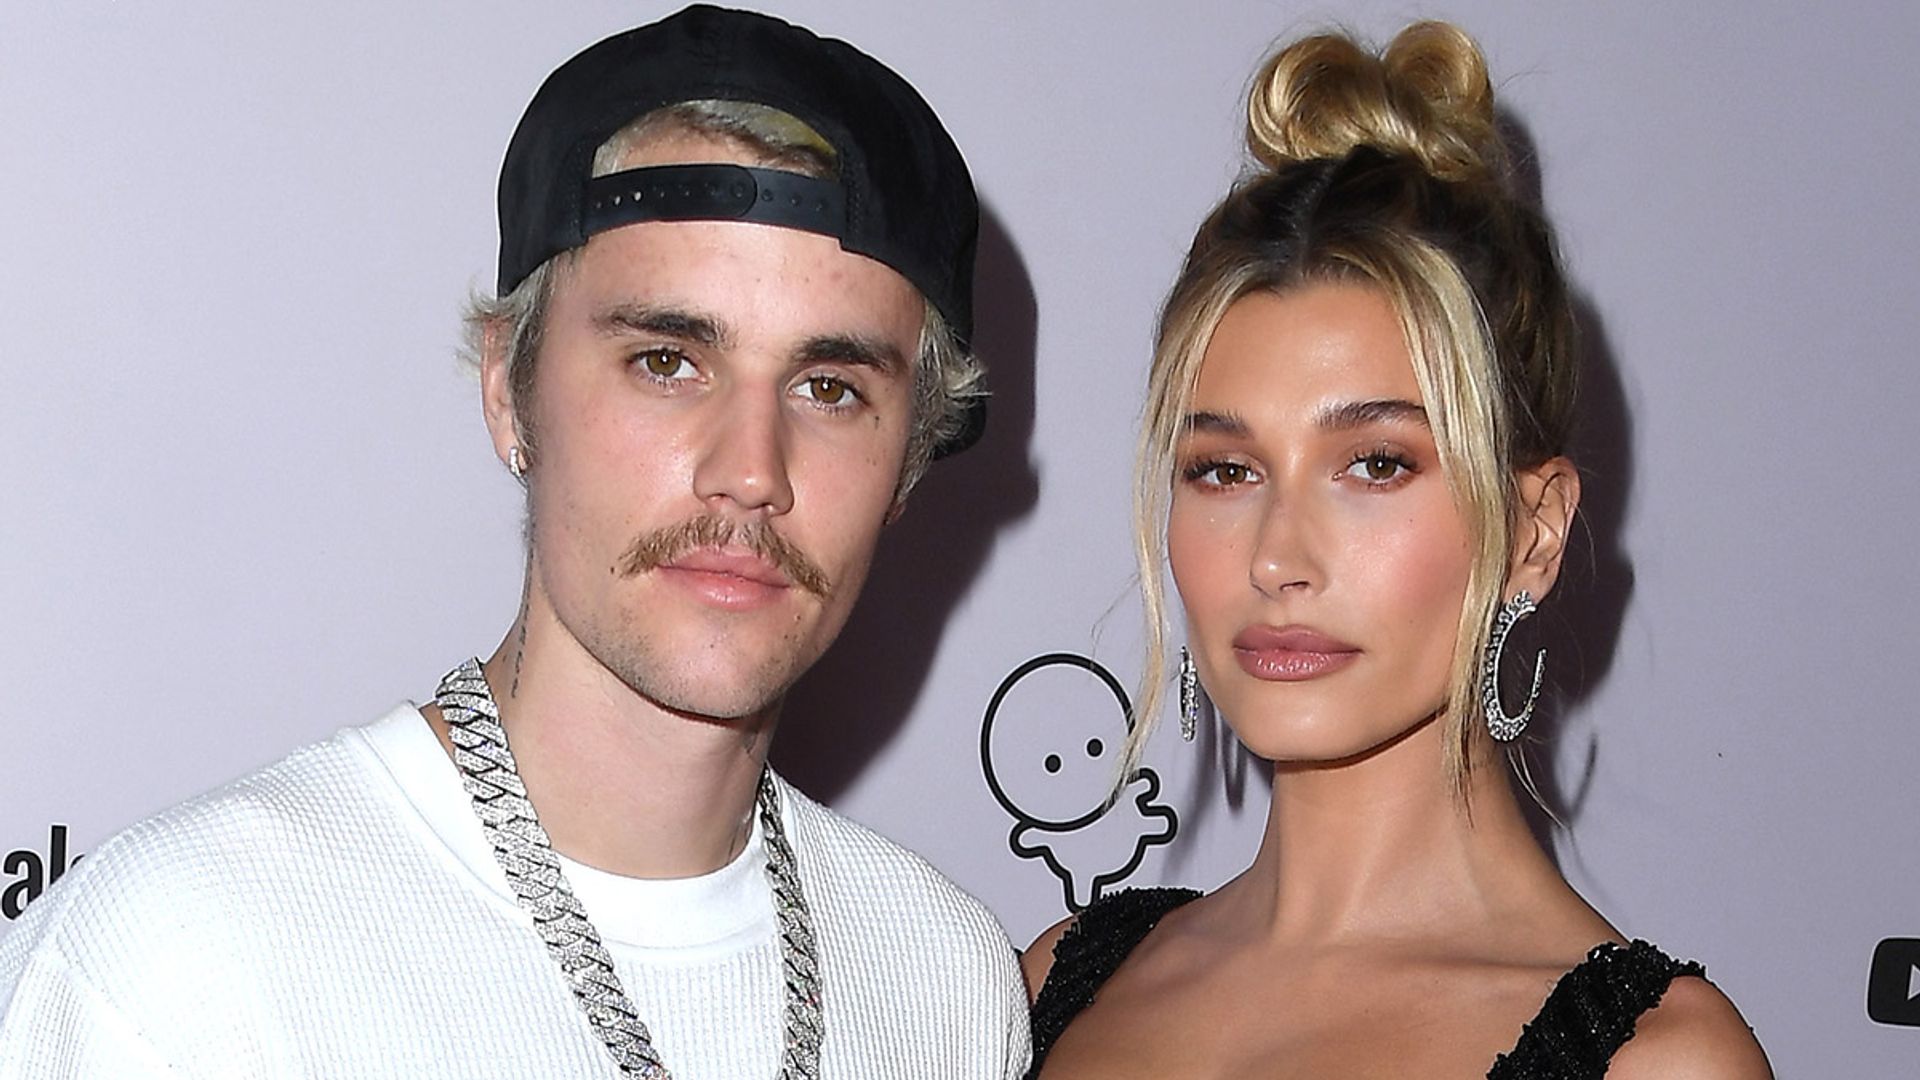 Hailey Bieber's fans react to magical wedding photos with husband Justin